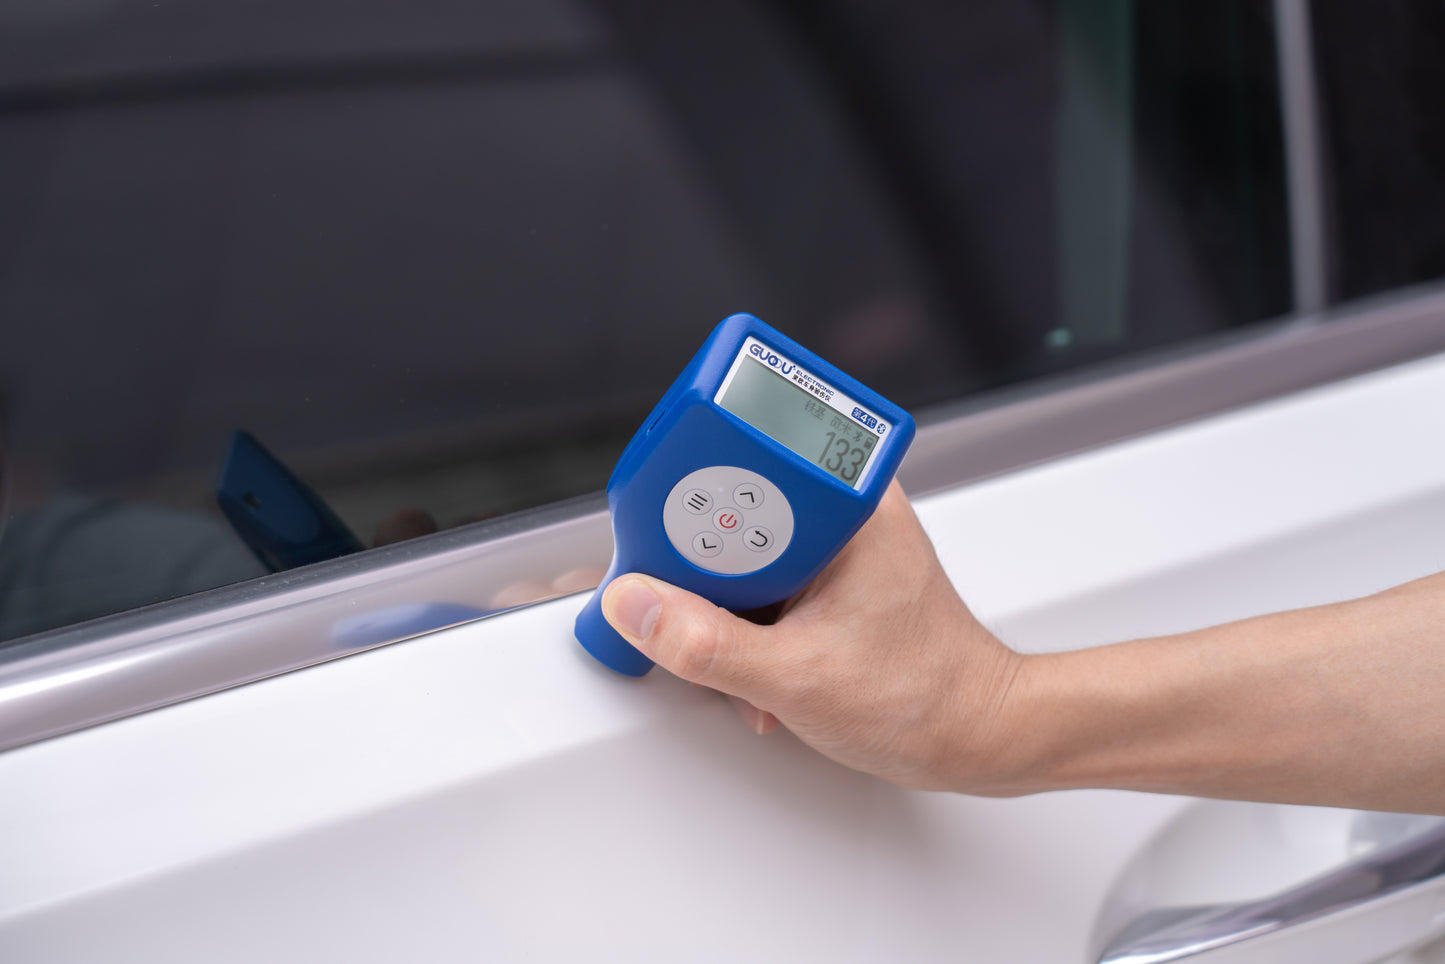 Car paint coating Thickness gauge with bluetooth and USB sync cable is connected to your mobile